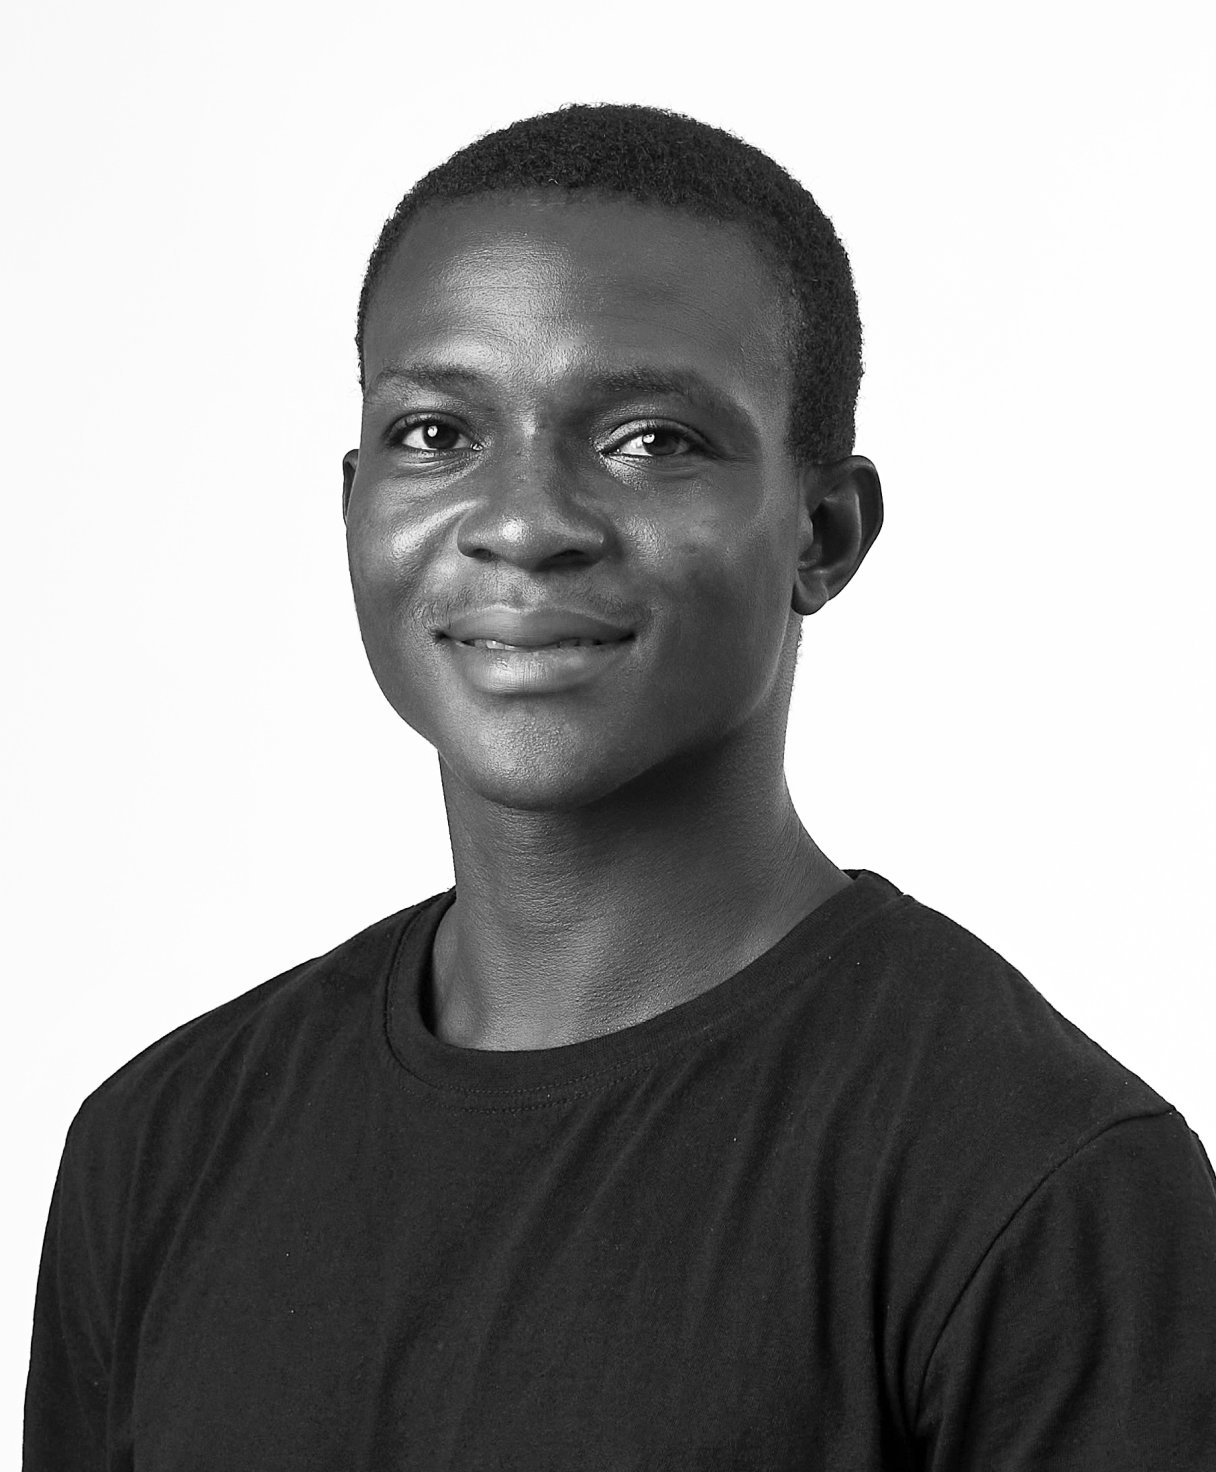 Black and white portrait of LAIDE ABIODUN as part of the Oshinowo Studio team picture